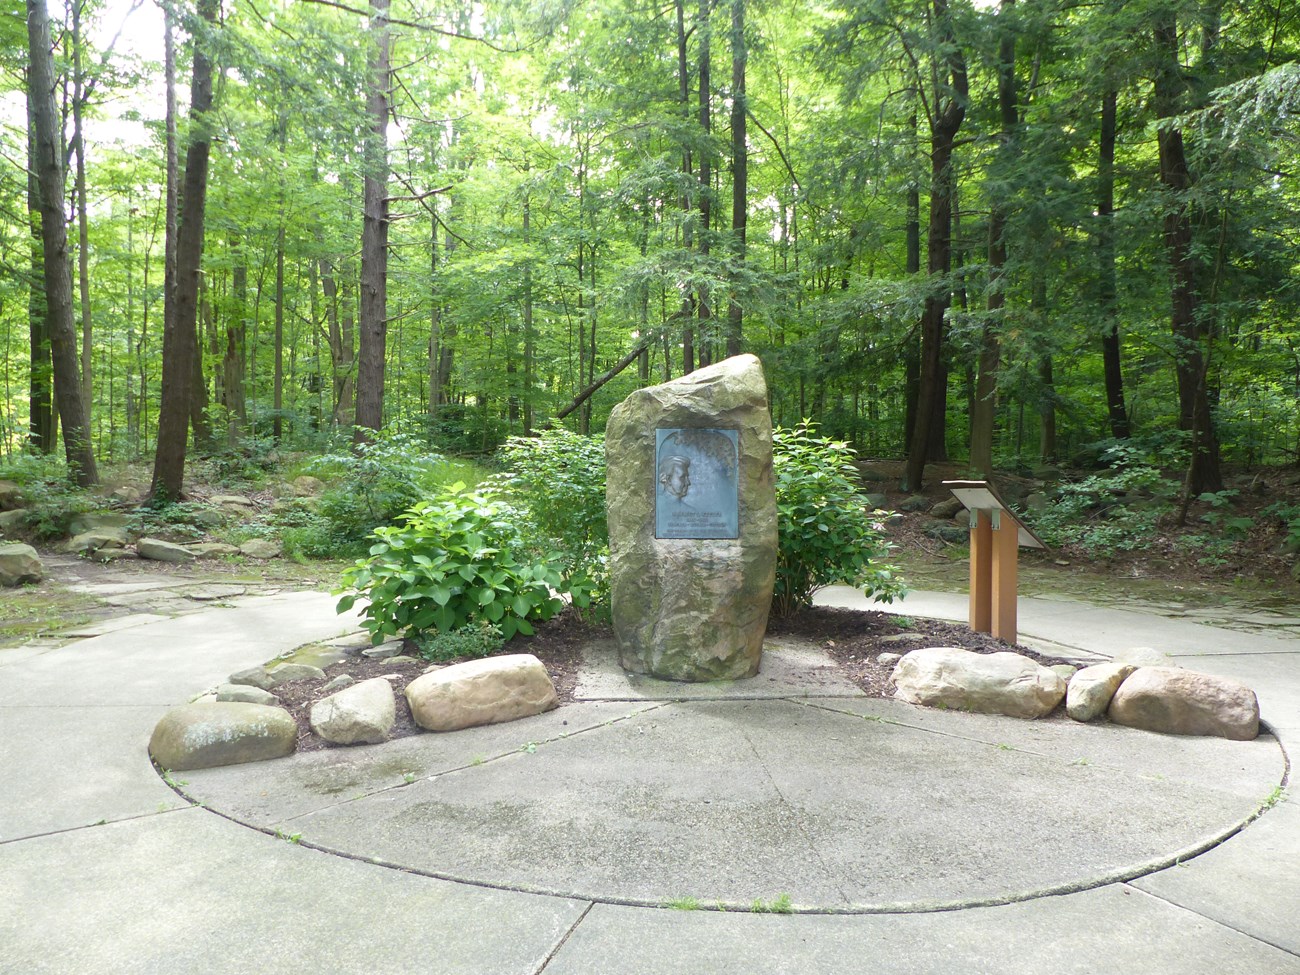 A small circular plaza surrounded by woods. In the center is an upright boulder with a bronze plaque. To the right is an interpretive panel in profile. Landscaping includes bushes, large rocks, and cement pavers.